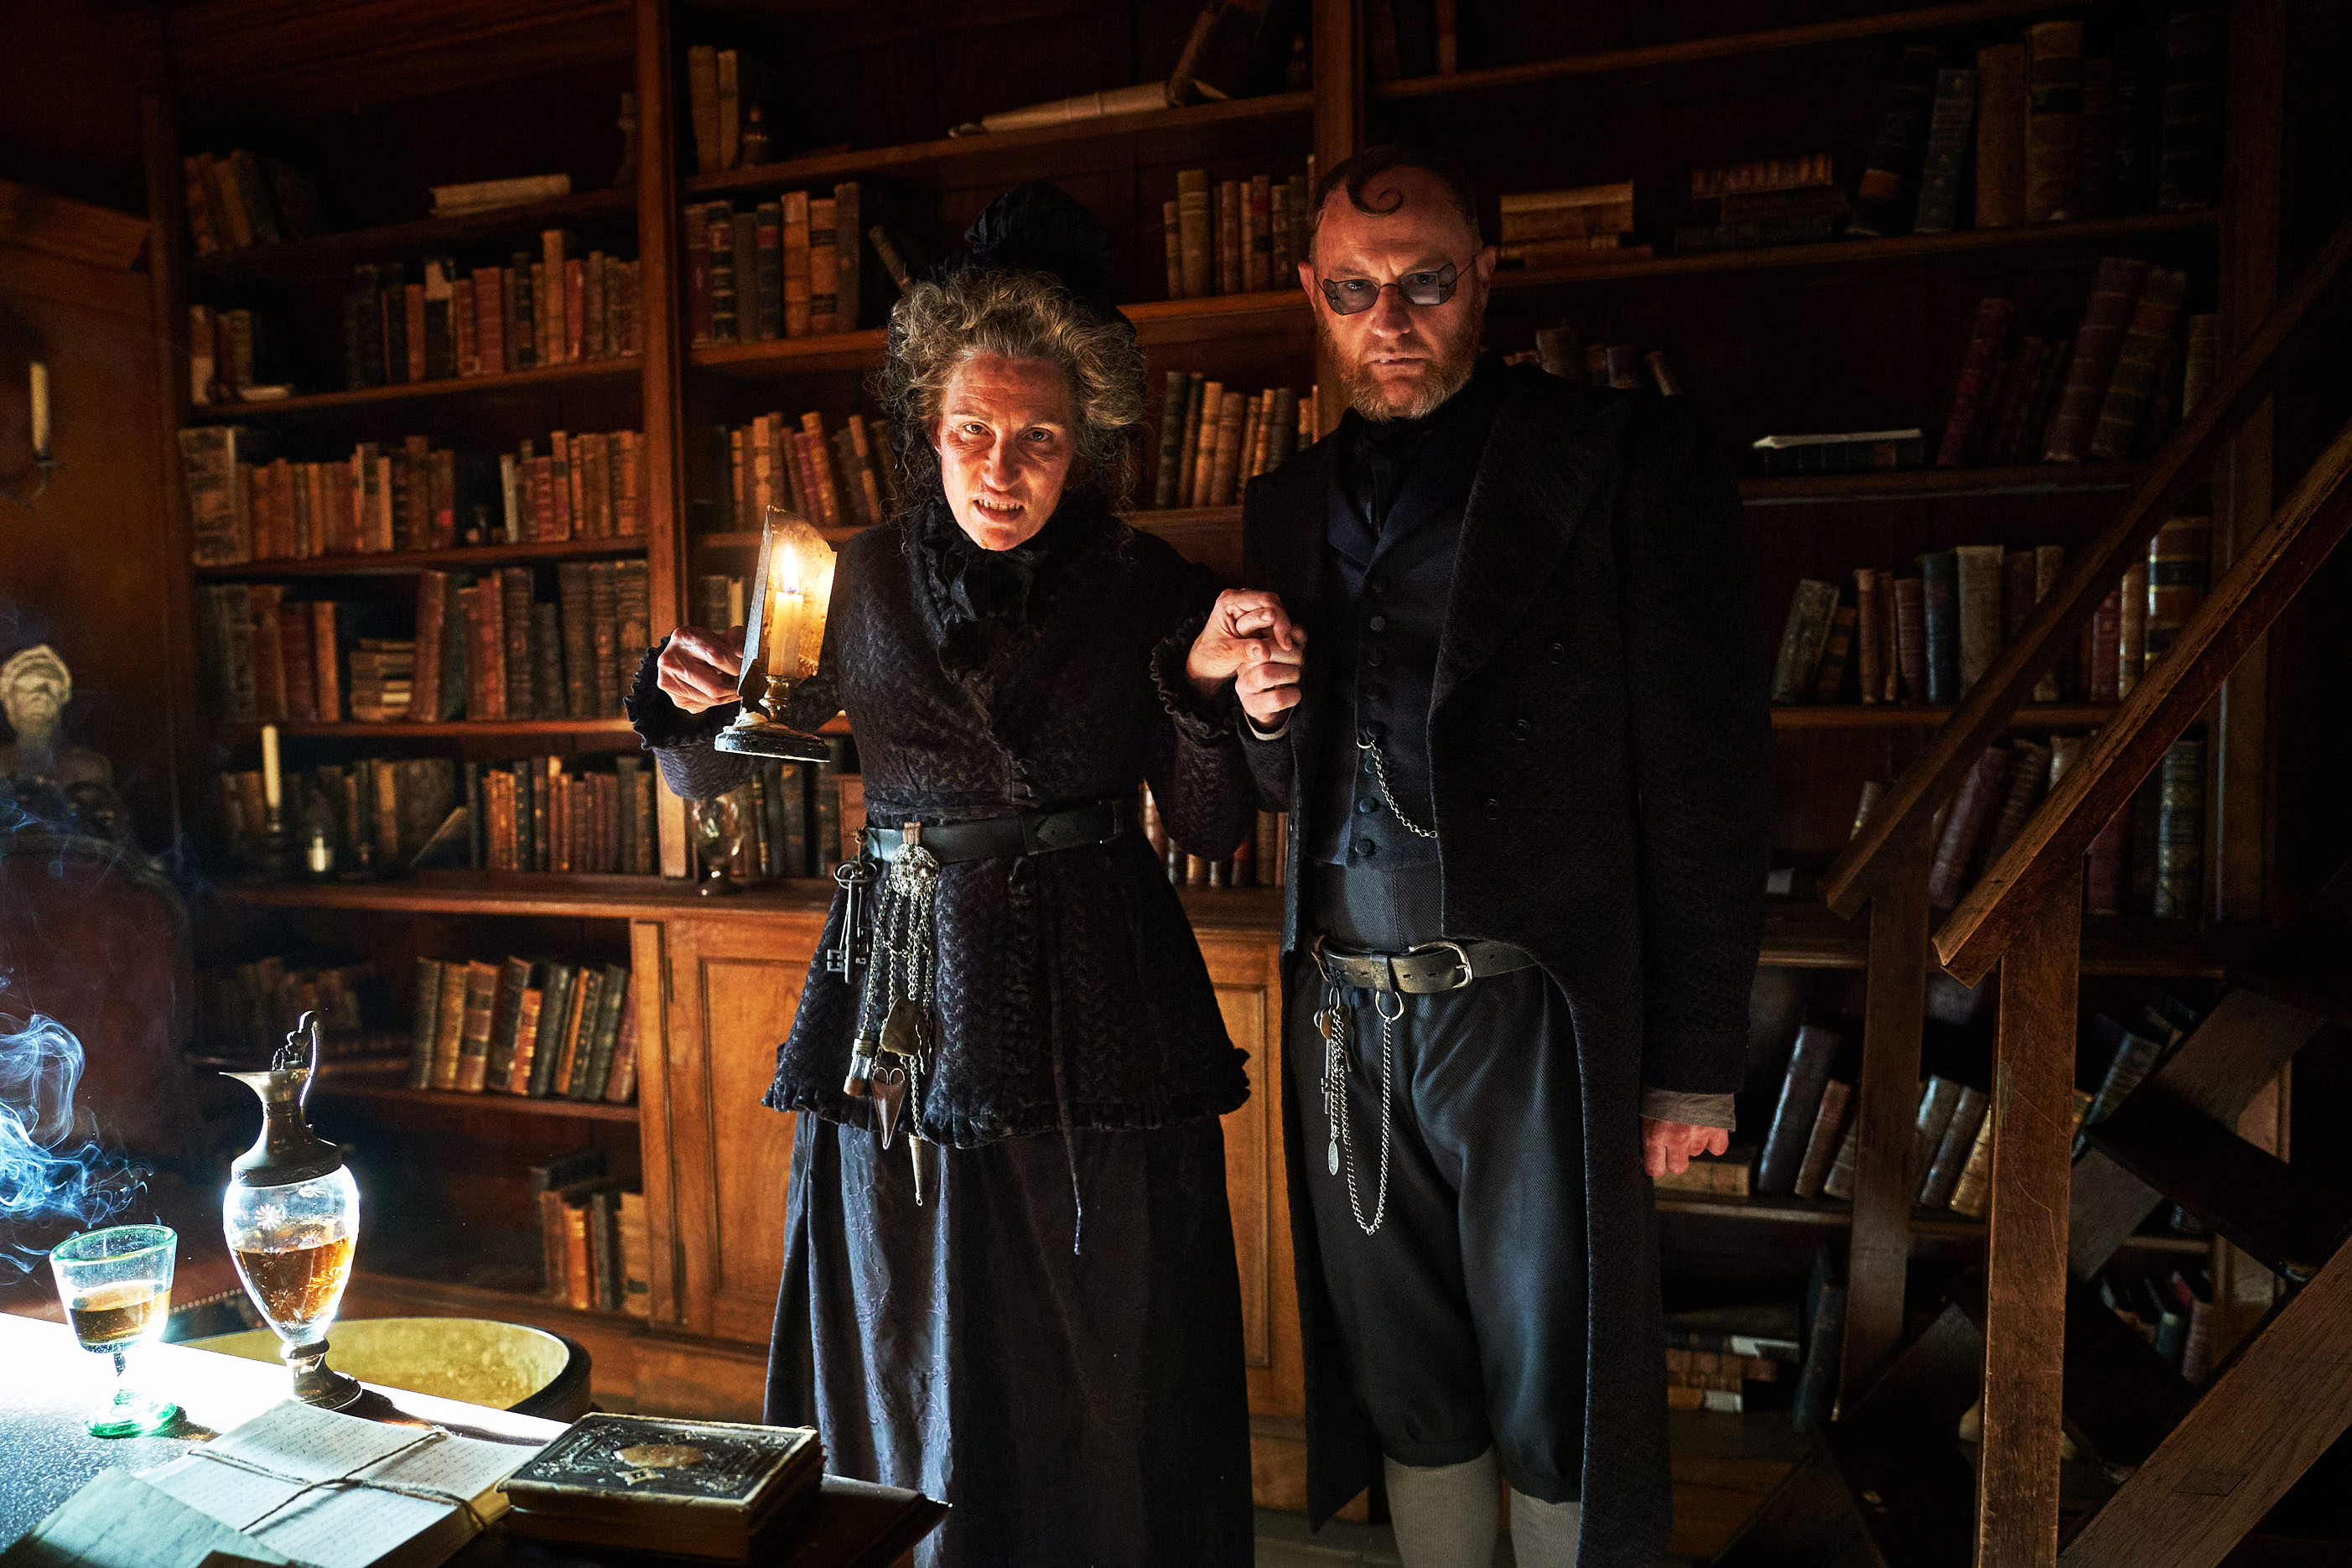 Mrs Wickens (Tamsin Greig) and Mr Wickens (Mark Gatiss) stand holding hands in the house's library, shelves behind them piled with books, while Mrs Wickens holds up a candle